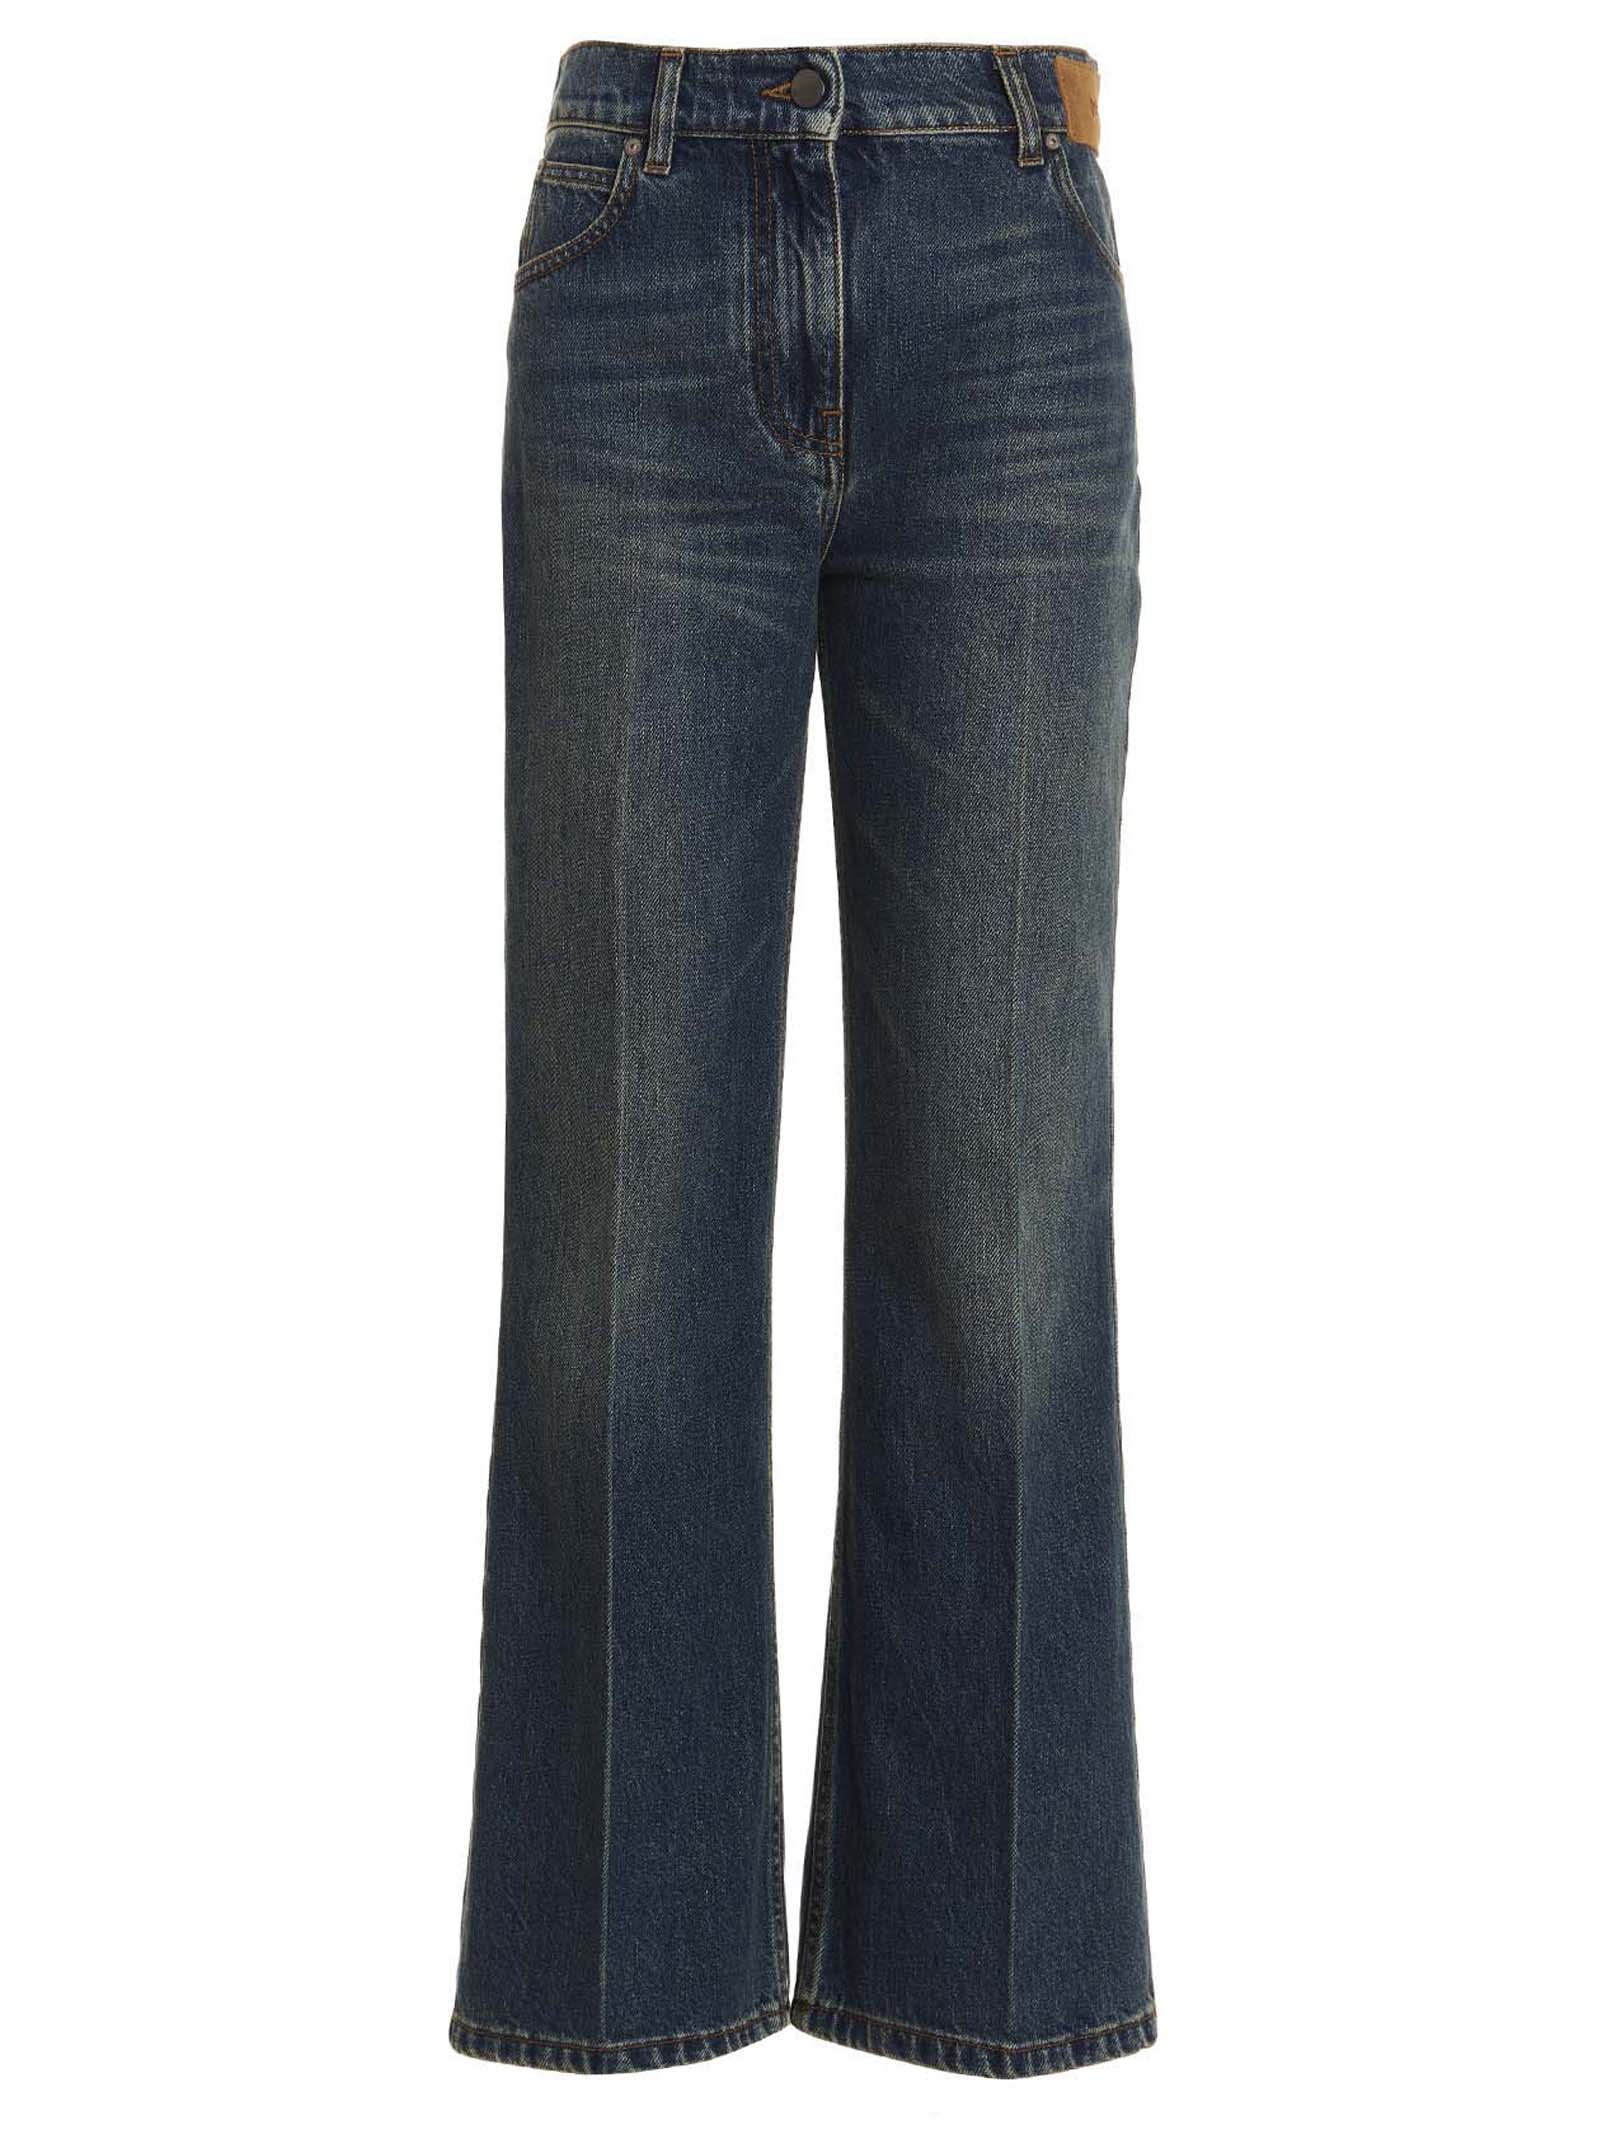 Palm Angels Star Flared Jeans